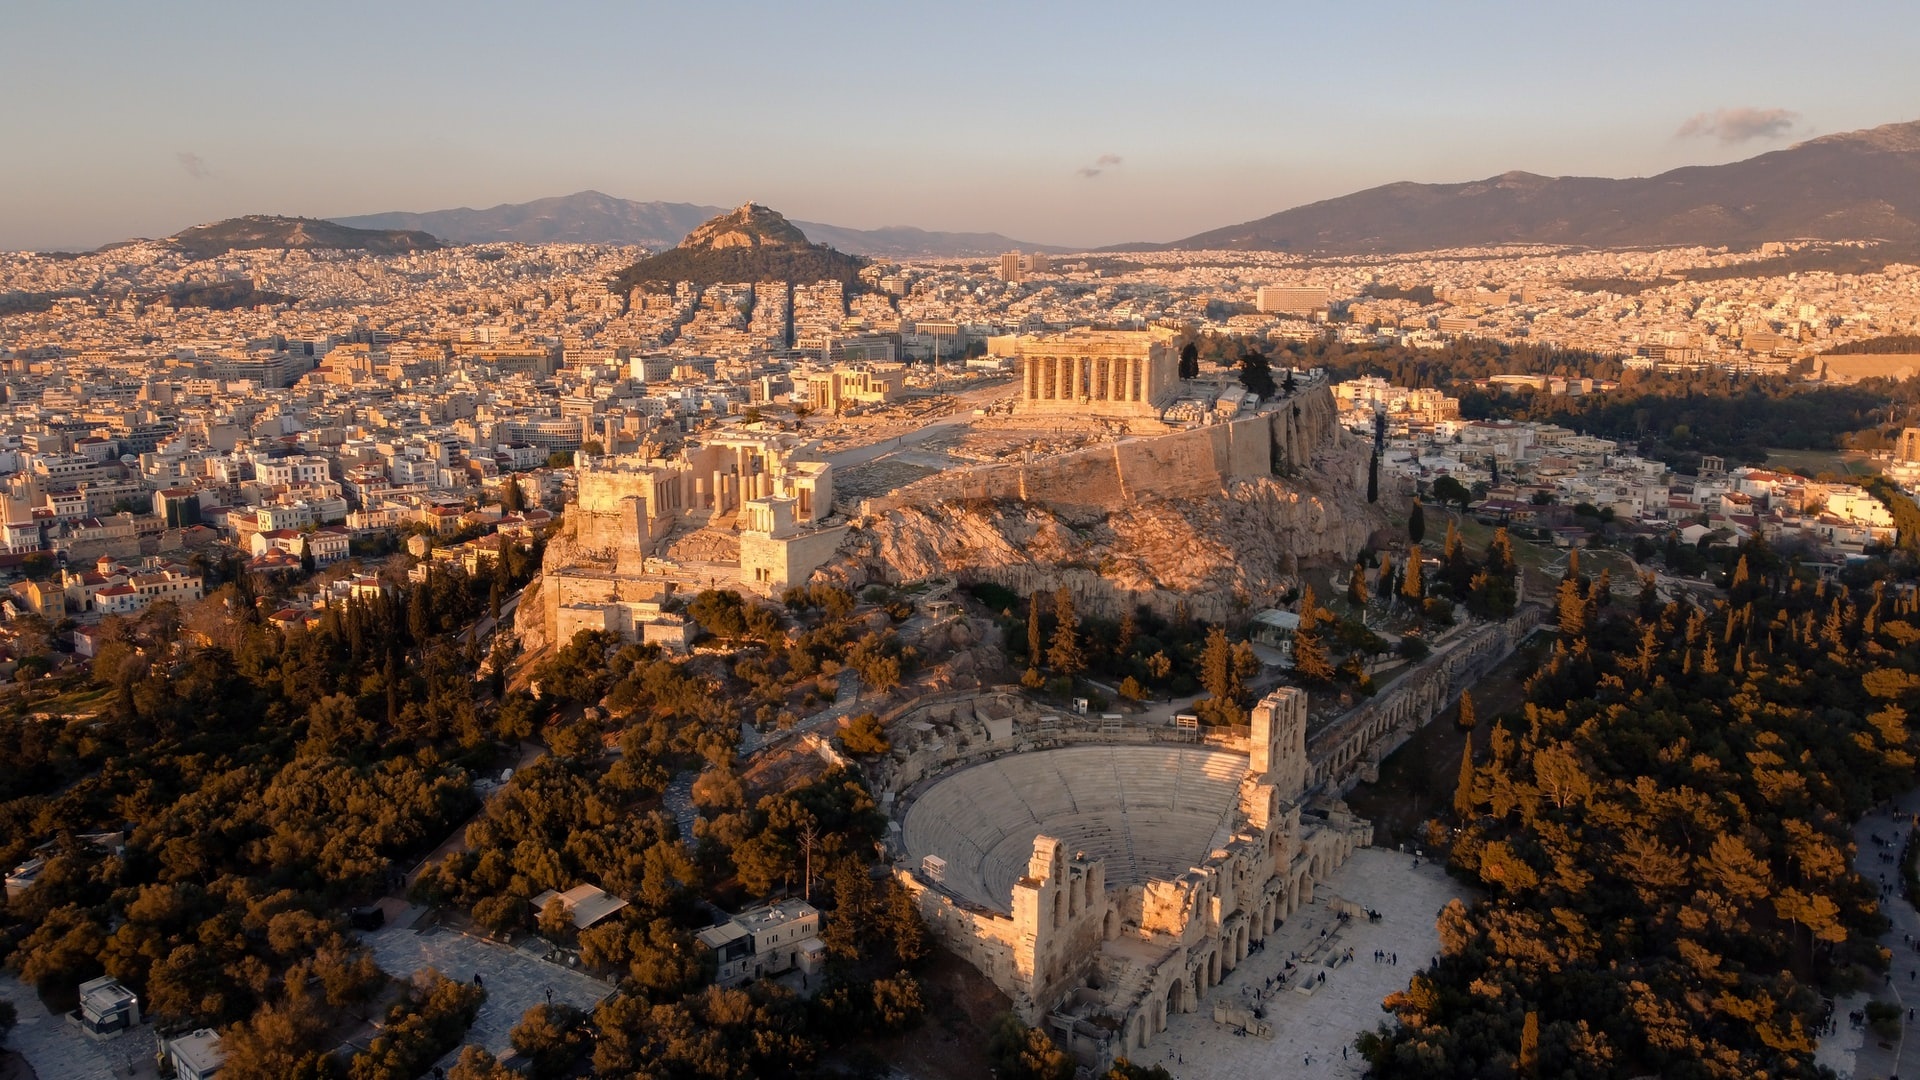 Top 10 things to do, Athens must-see, Popular attractions, Essential experiences, 1920x1080 Full HD Desktop